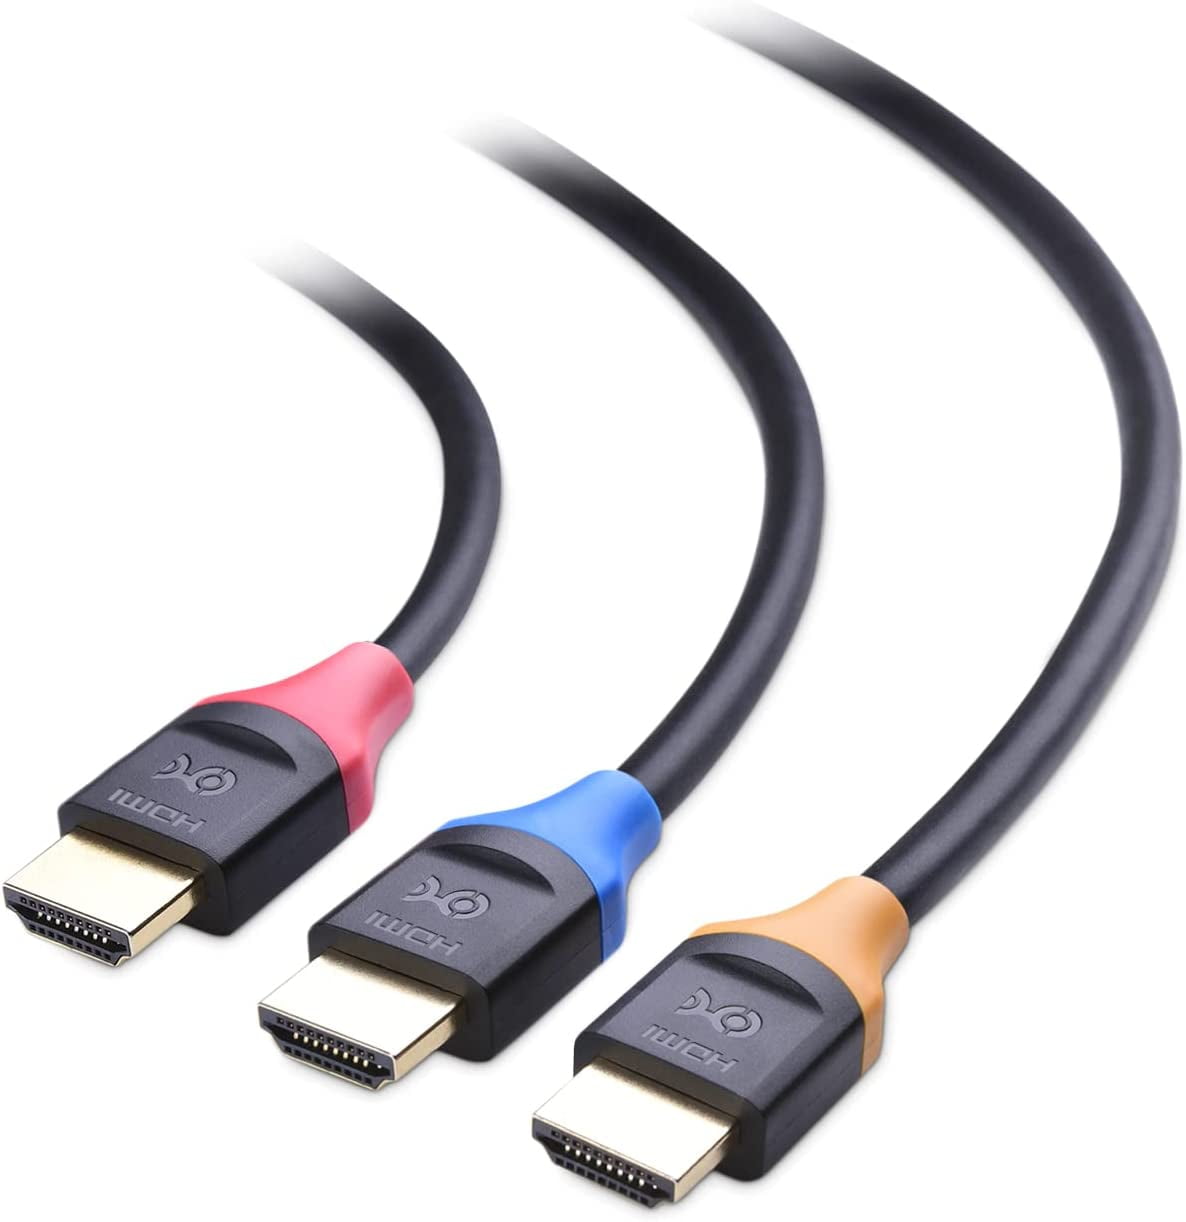 Cable Matters 3-Pack High Speed HDMI Cable 6 ft with 4K @60Hz, 2K @144Hz, FreeSync, G-SYNC and HDR Support for Monitor, PC, Apple TV, and More - Walmart.com